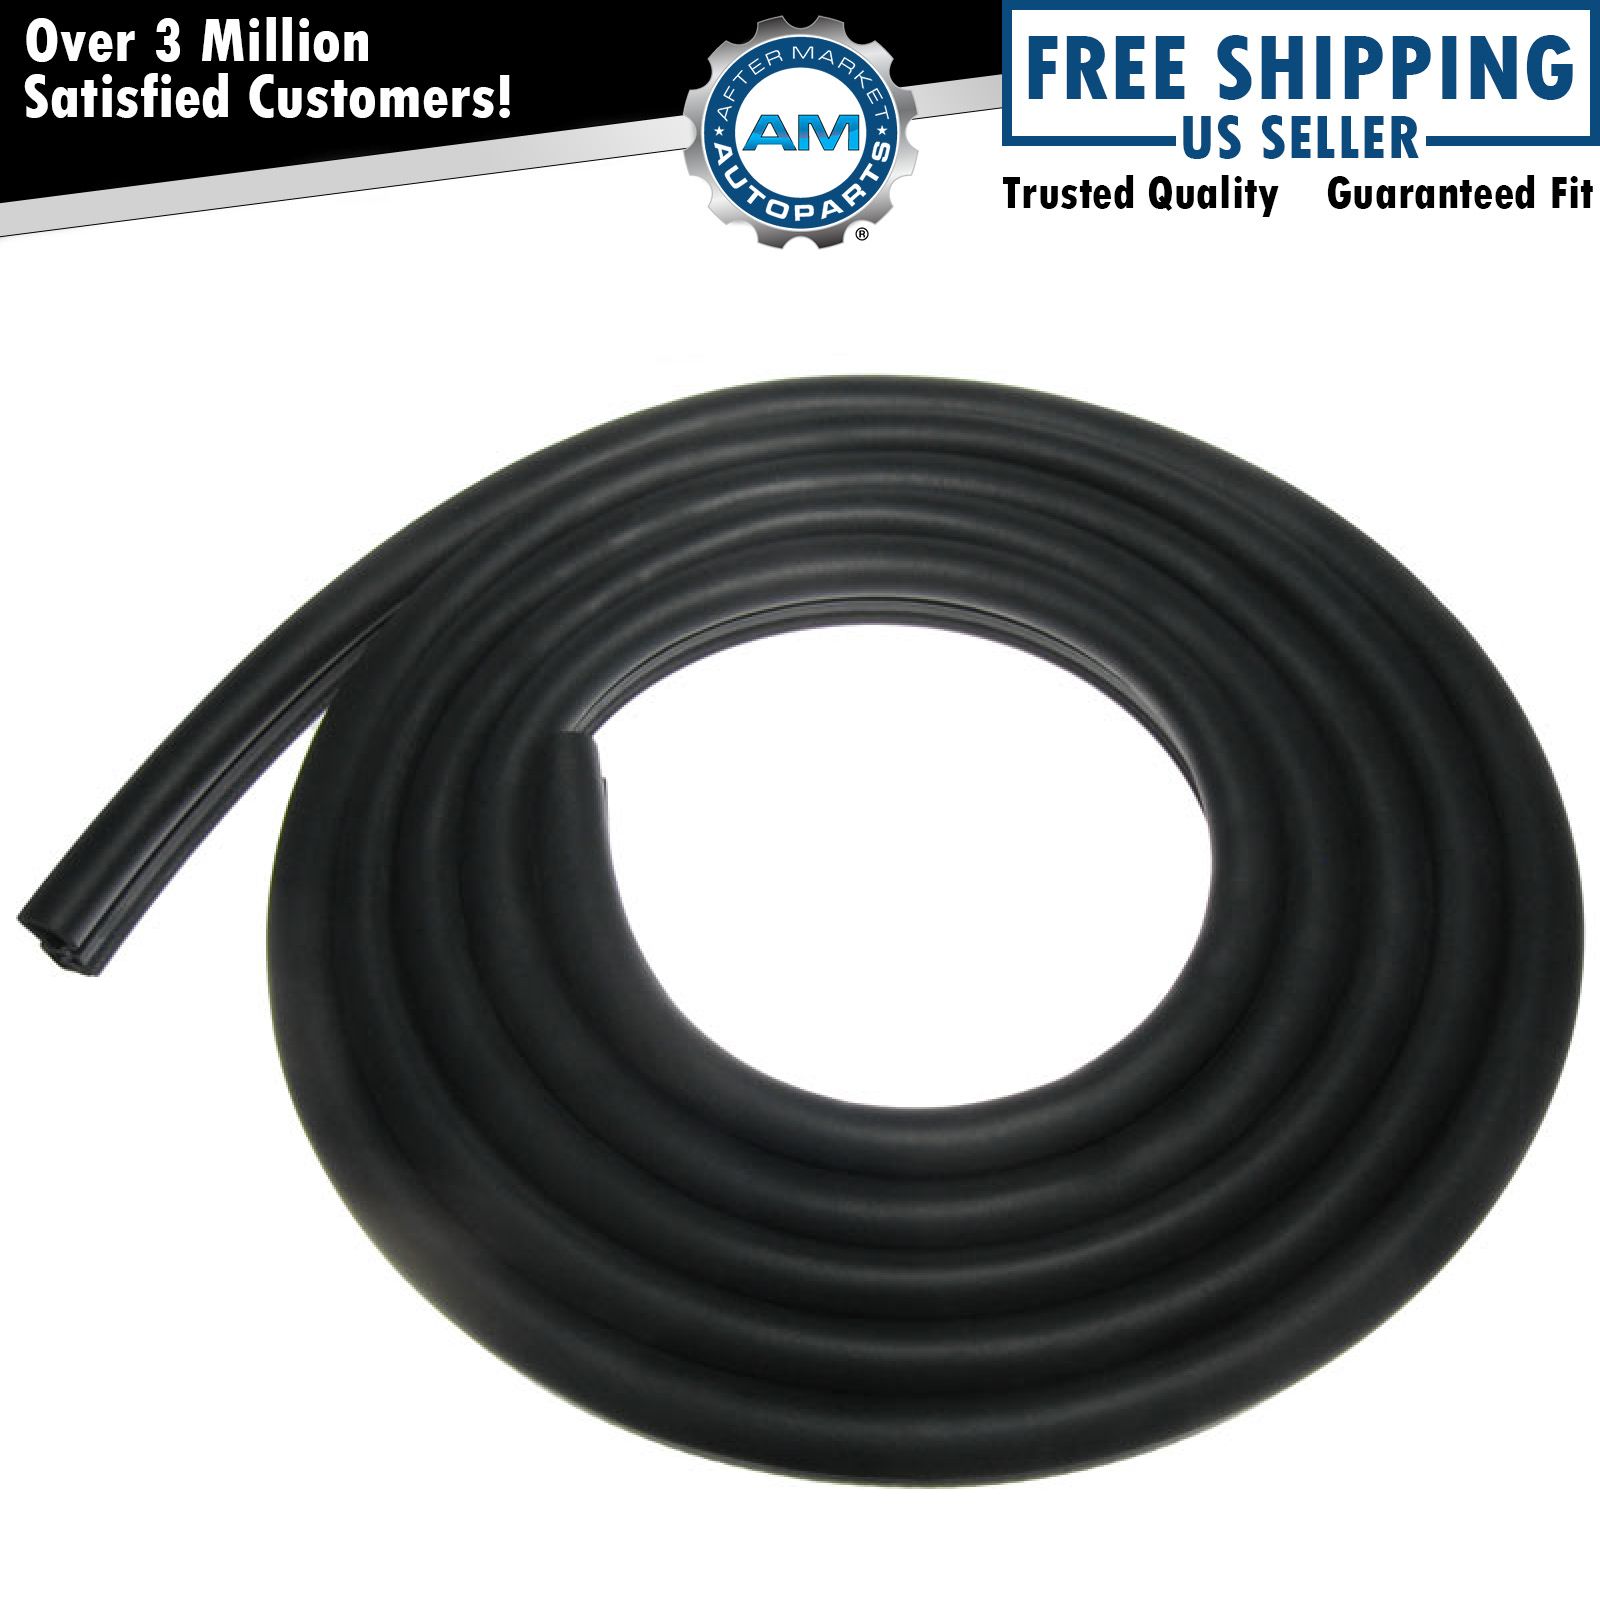 Rear Tailgate Liftgate Rubber Weatherstrip Seal for Escalade Suburban Tahoe